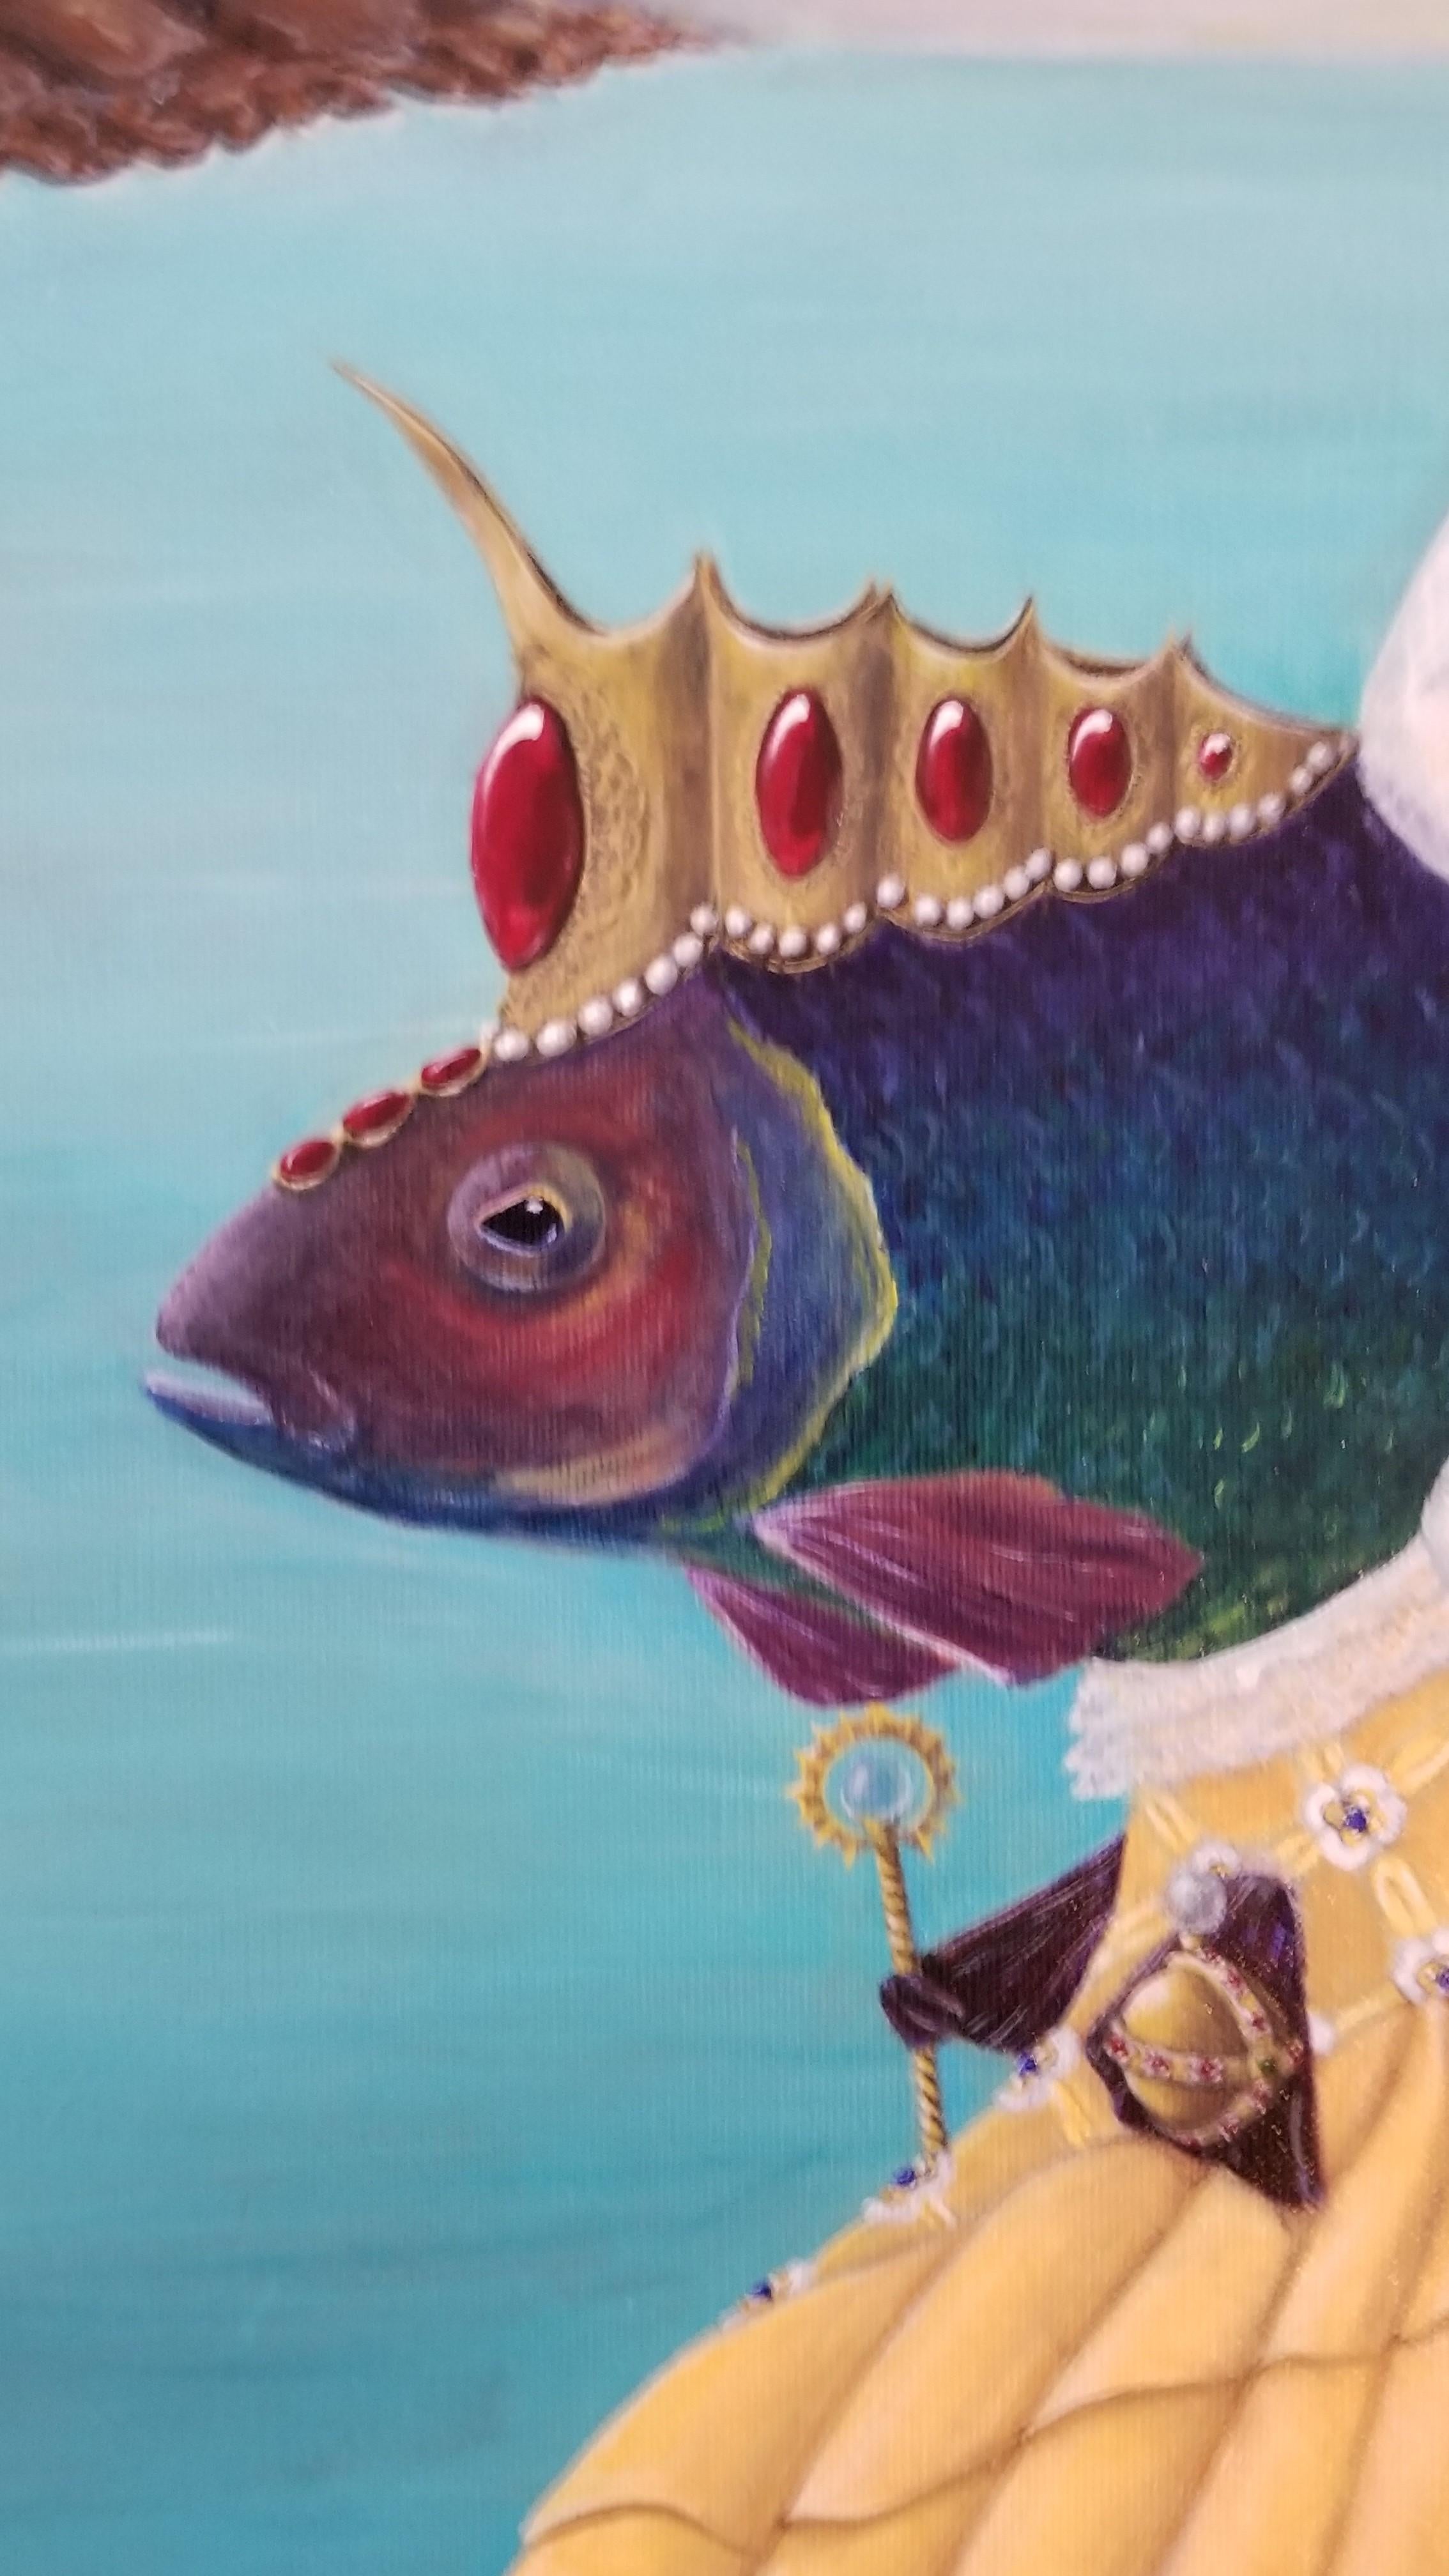 Close attention to detail.
Surreal Dark Humor
COMES ON STRETCHED CANVAS, FRAMED.

About the Series: “Sovereigns of the Sea.” The series grew out of an amusing little sketch she did of a fish in a gown. Very soon she was researching official